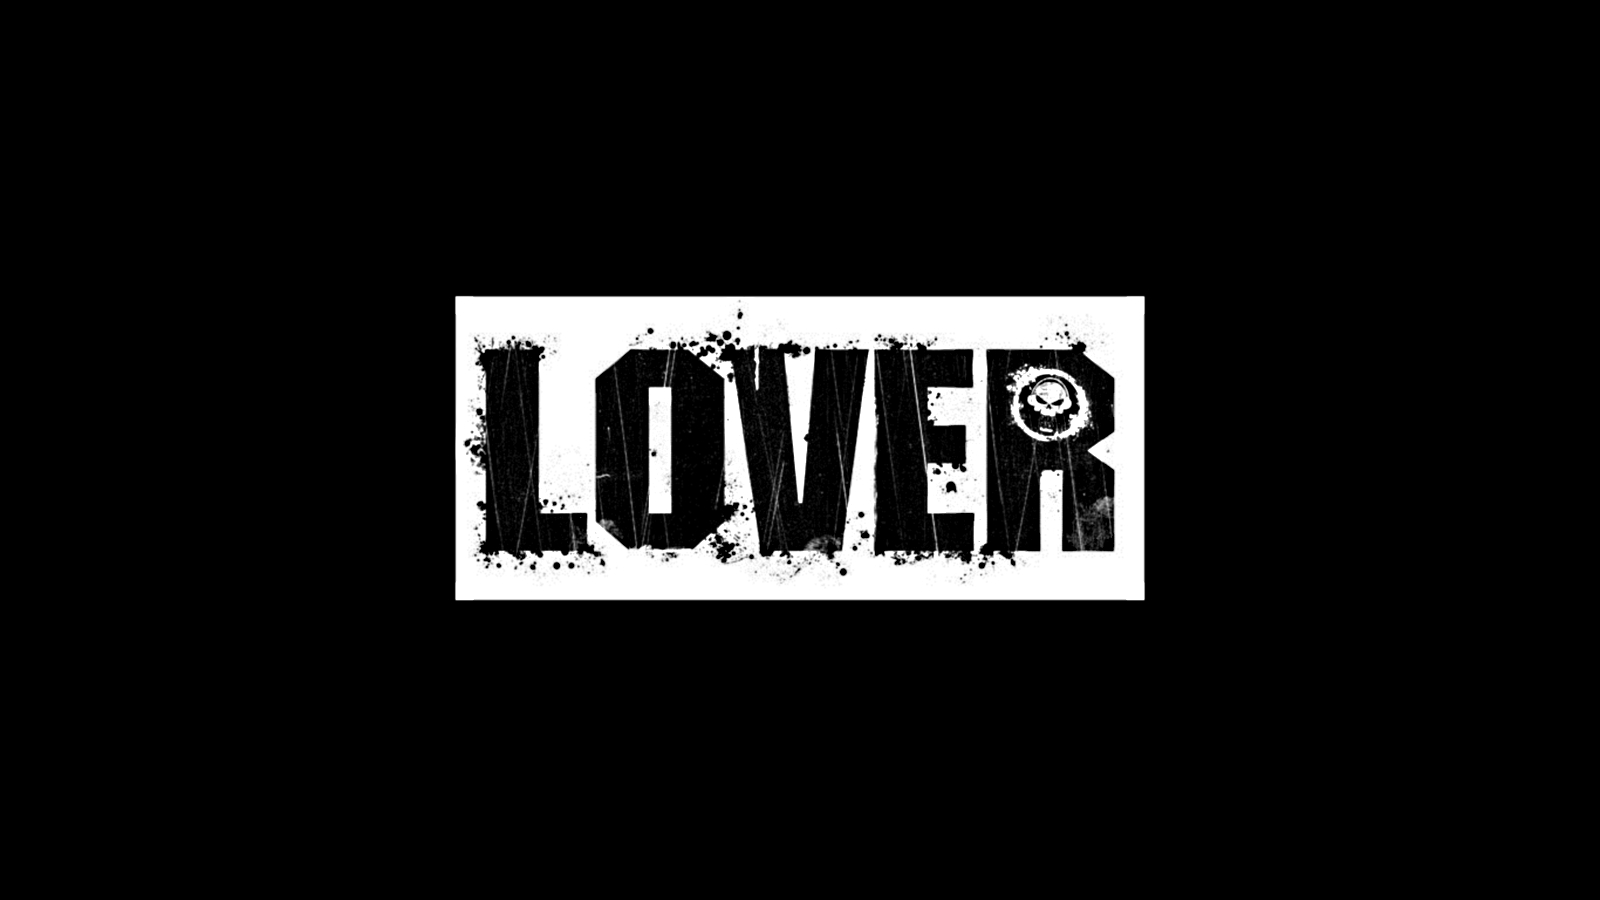 music lover images wallpaper,font,text,logo,graphic design,black and white